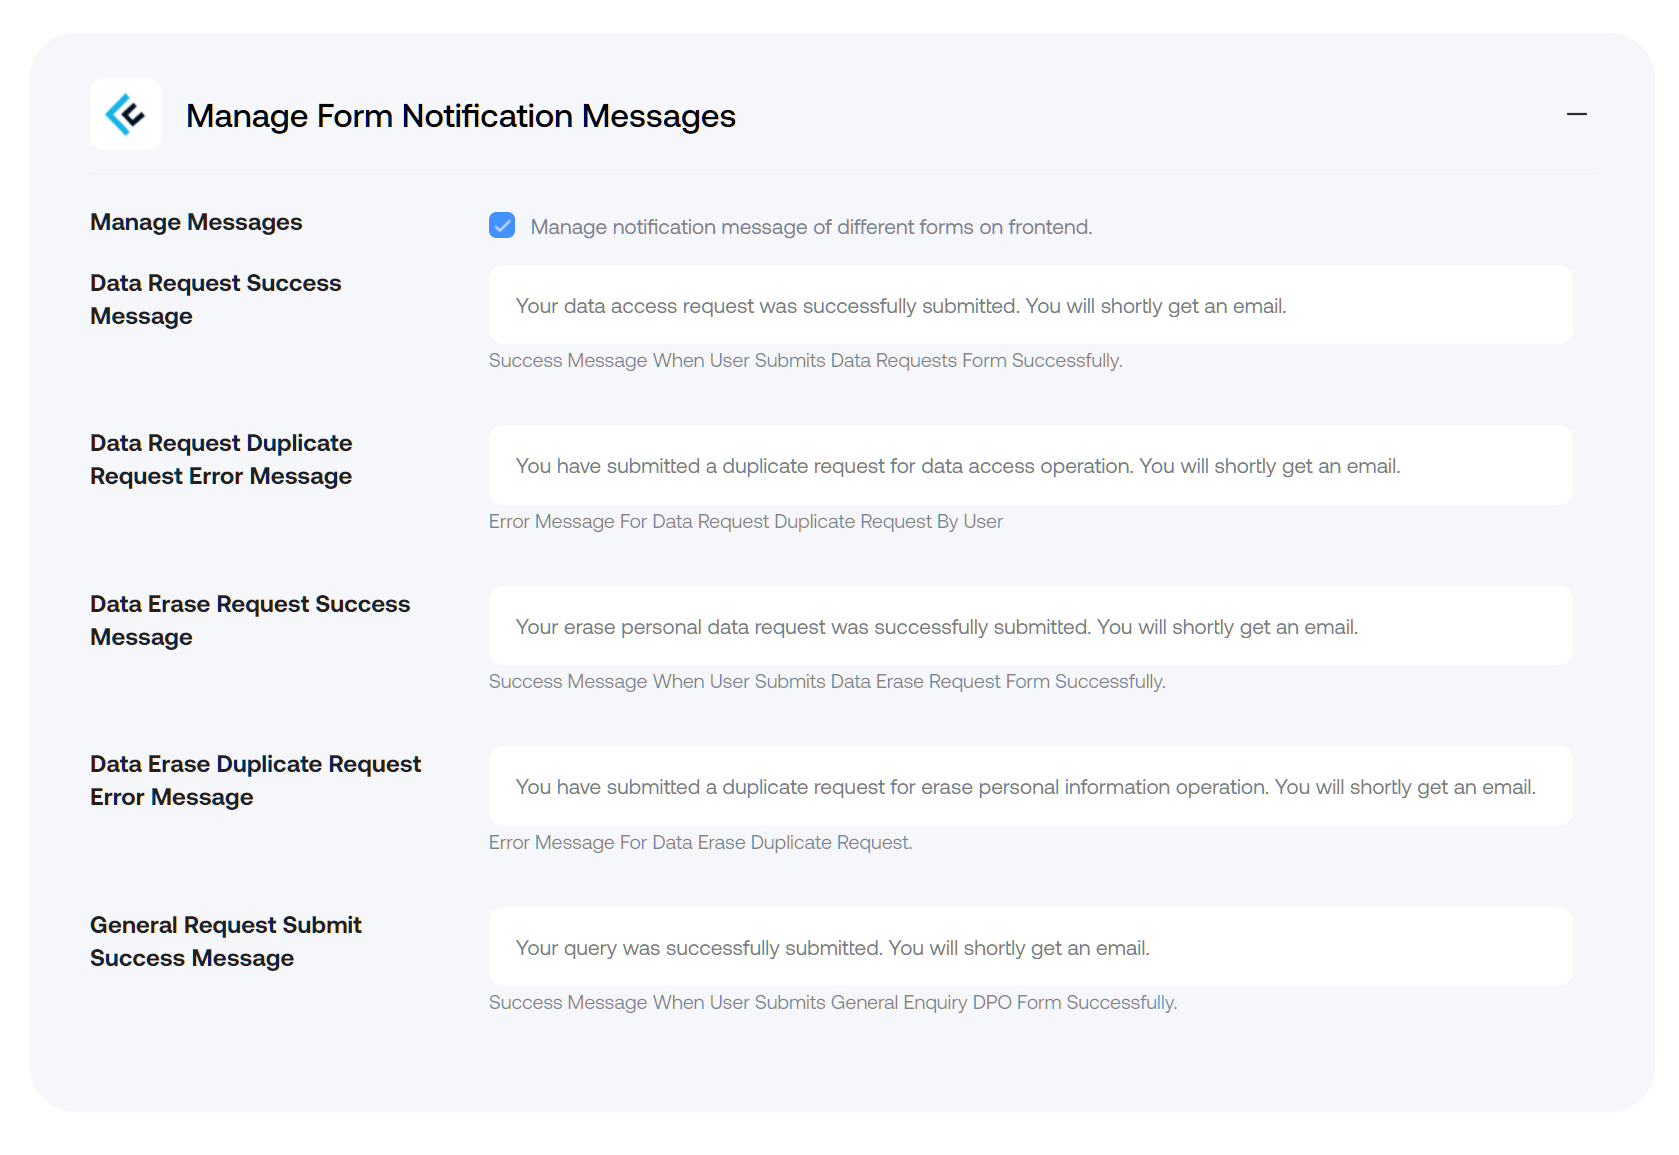 Manage Form Notification Messages